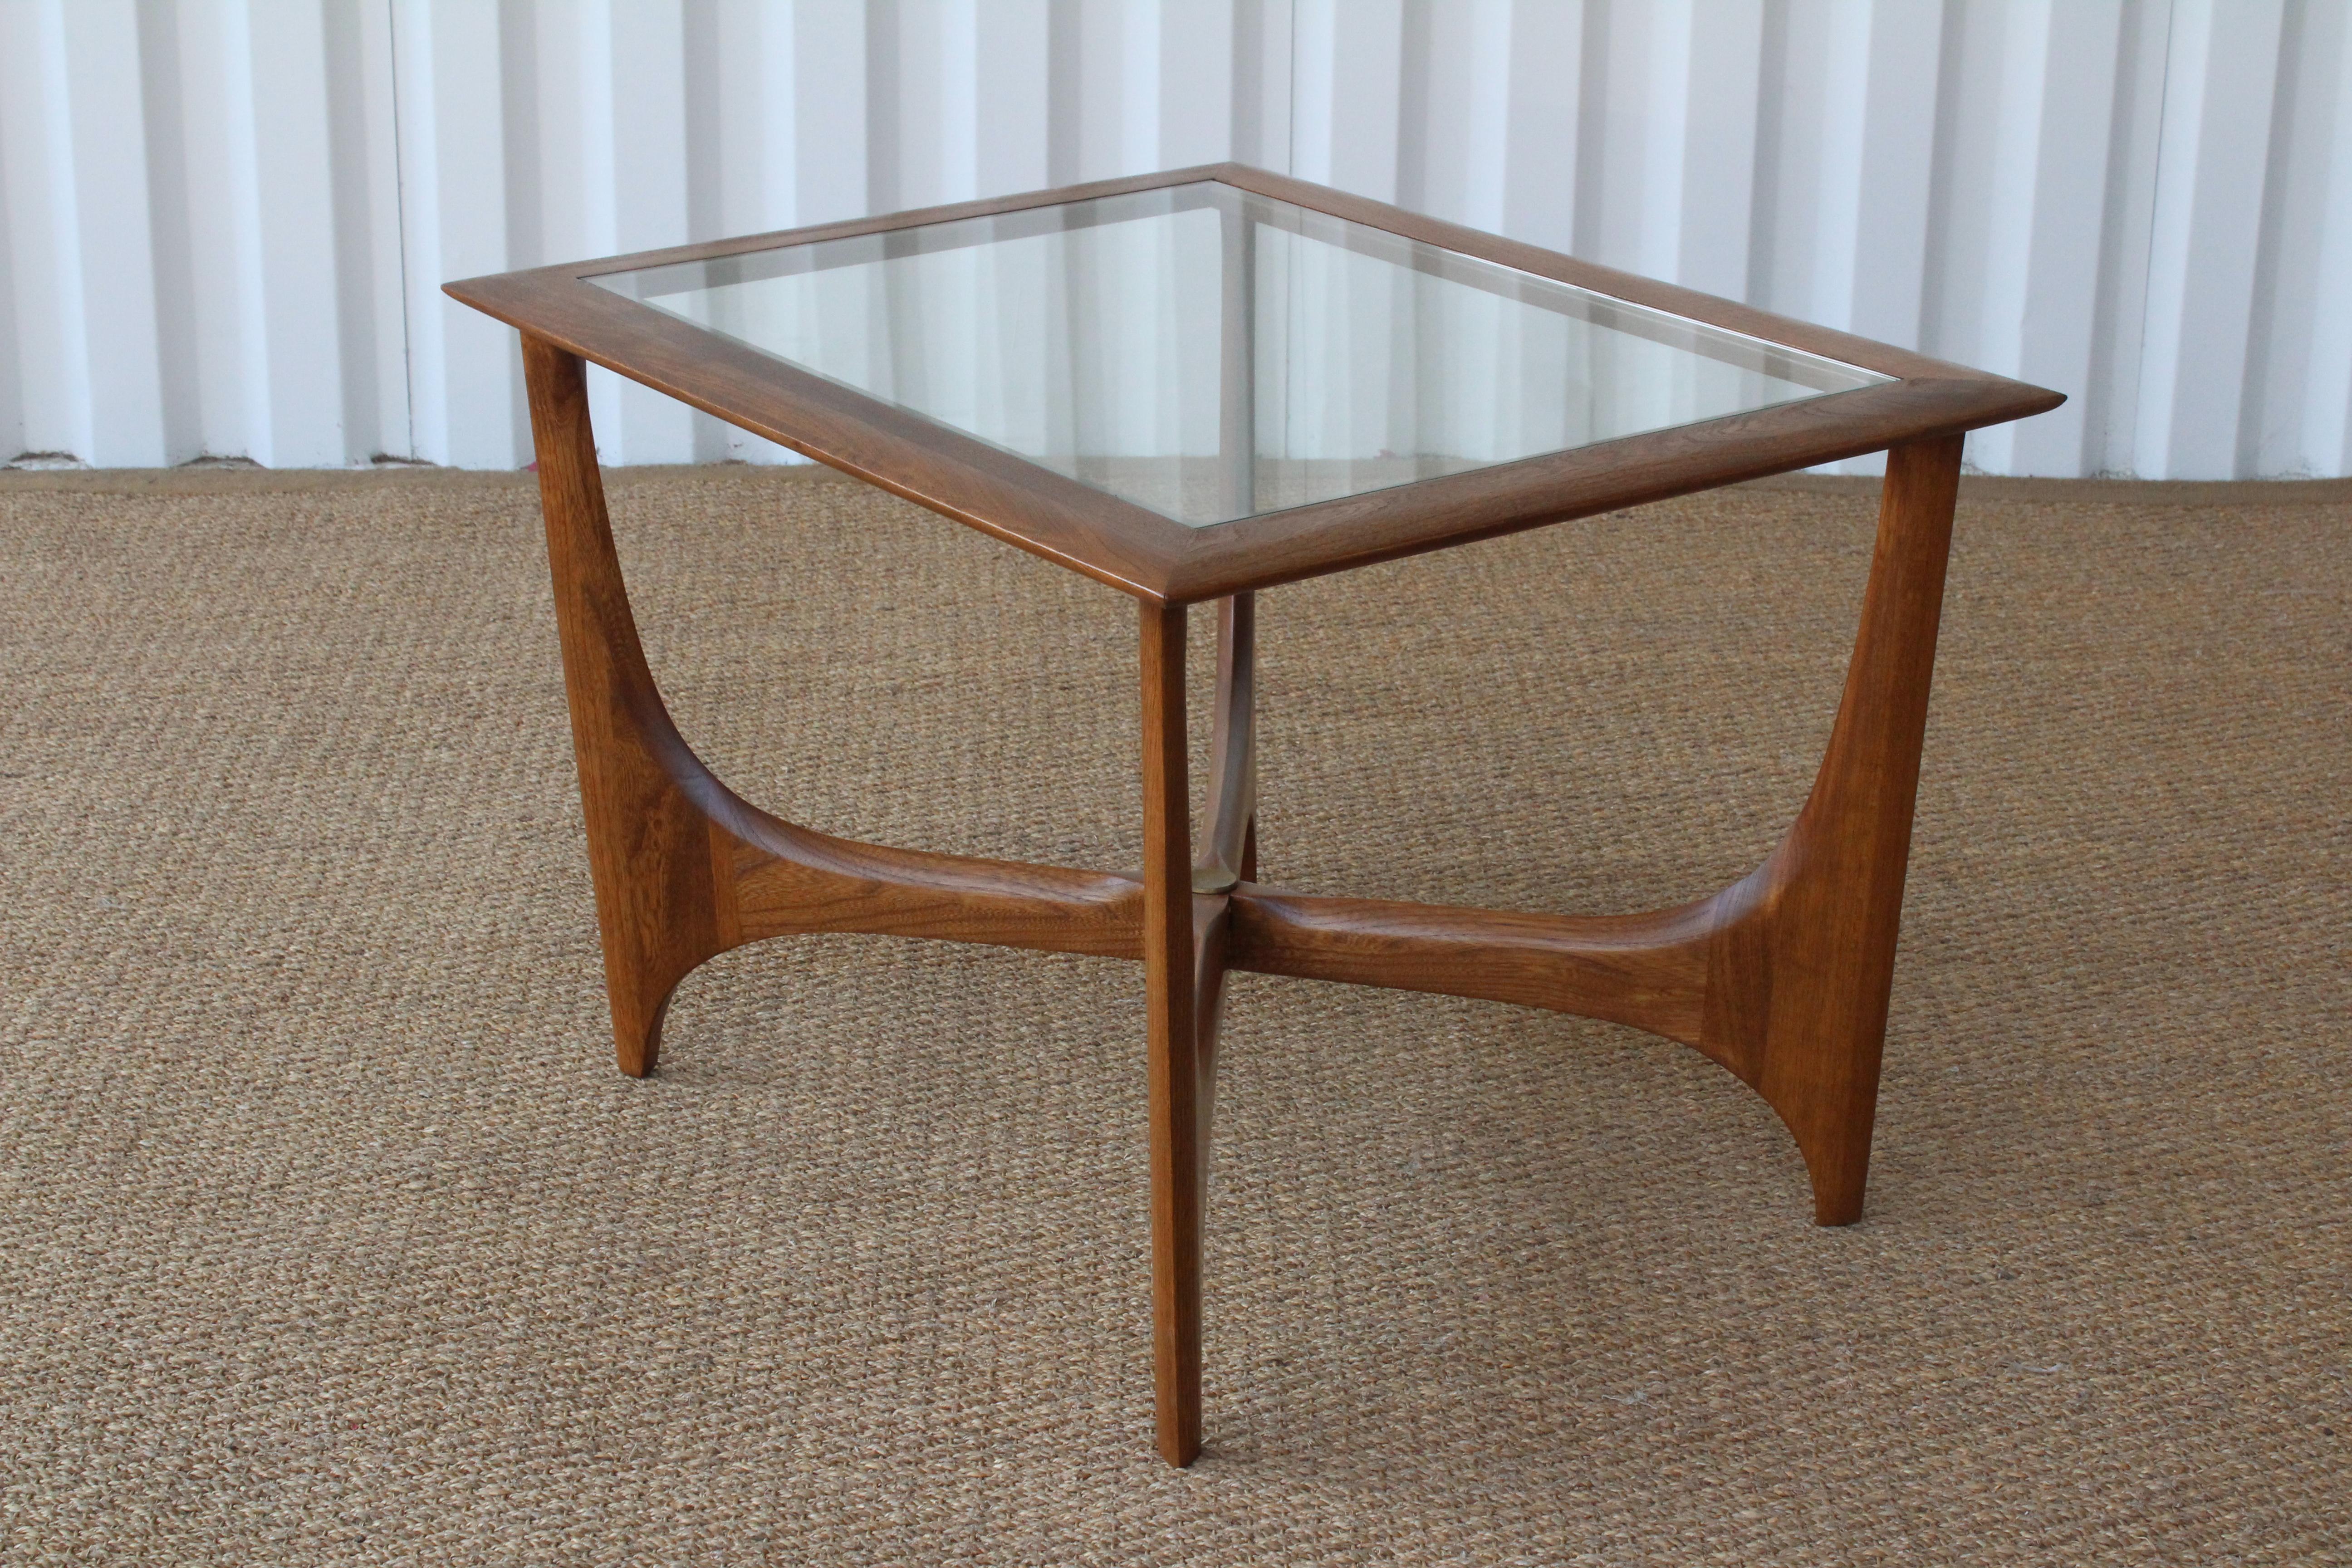 Sculptural walnut side table by Lane with new glass insert top, USA, 1960s. Newly refinished.